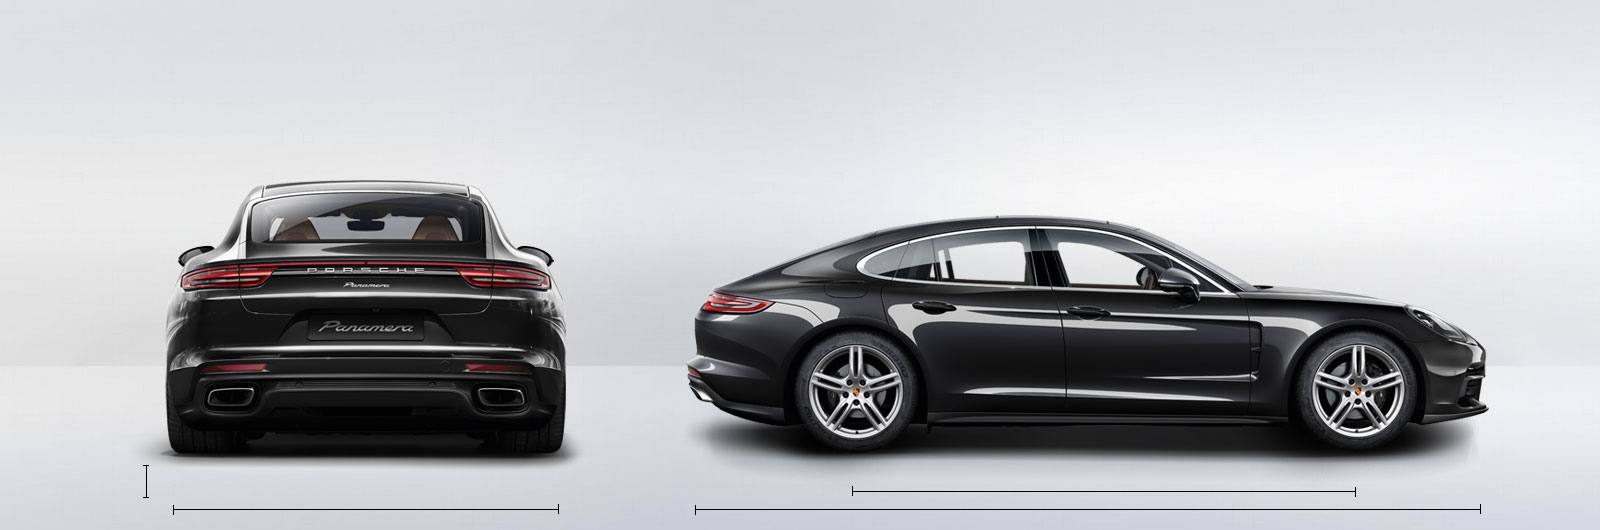 Panamera Specifications